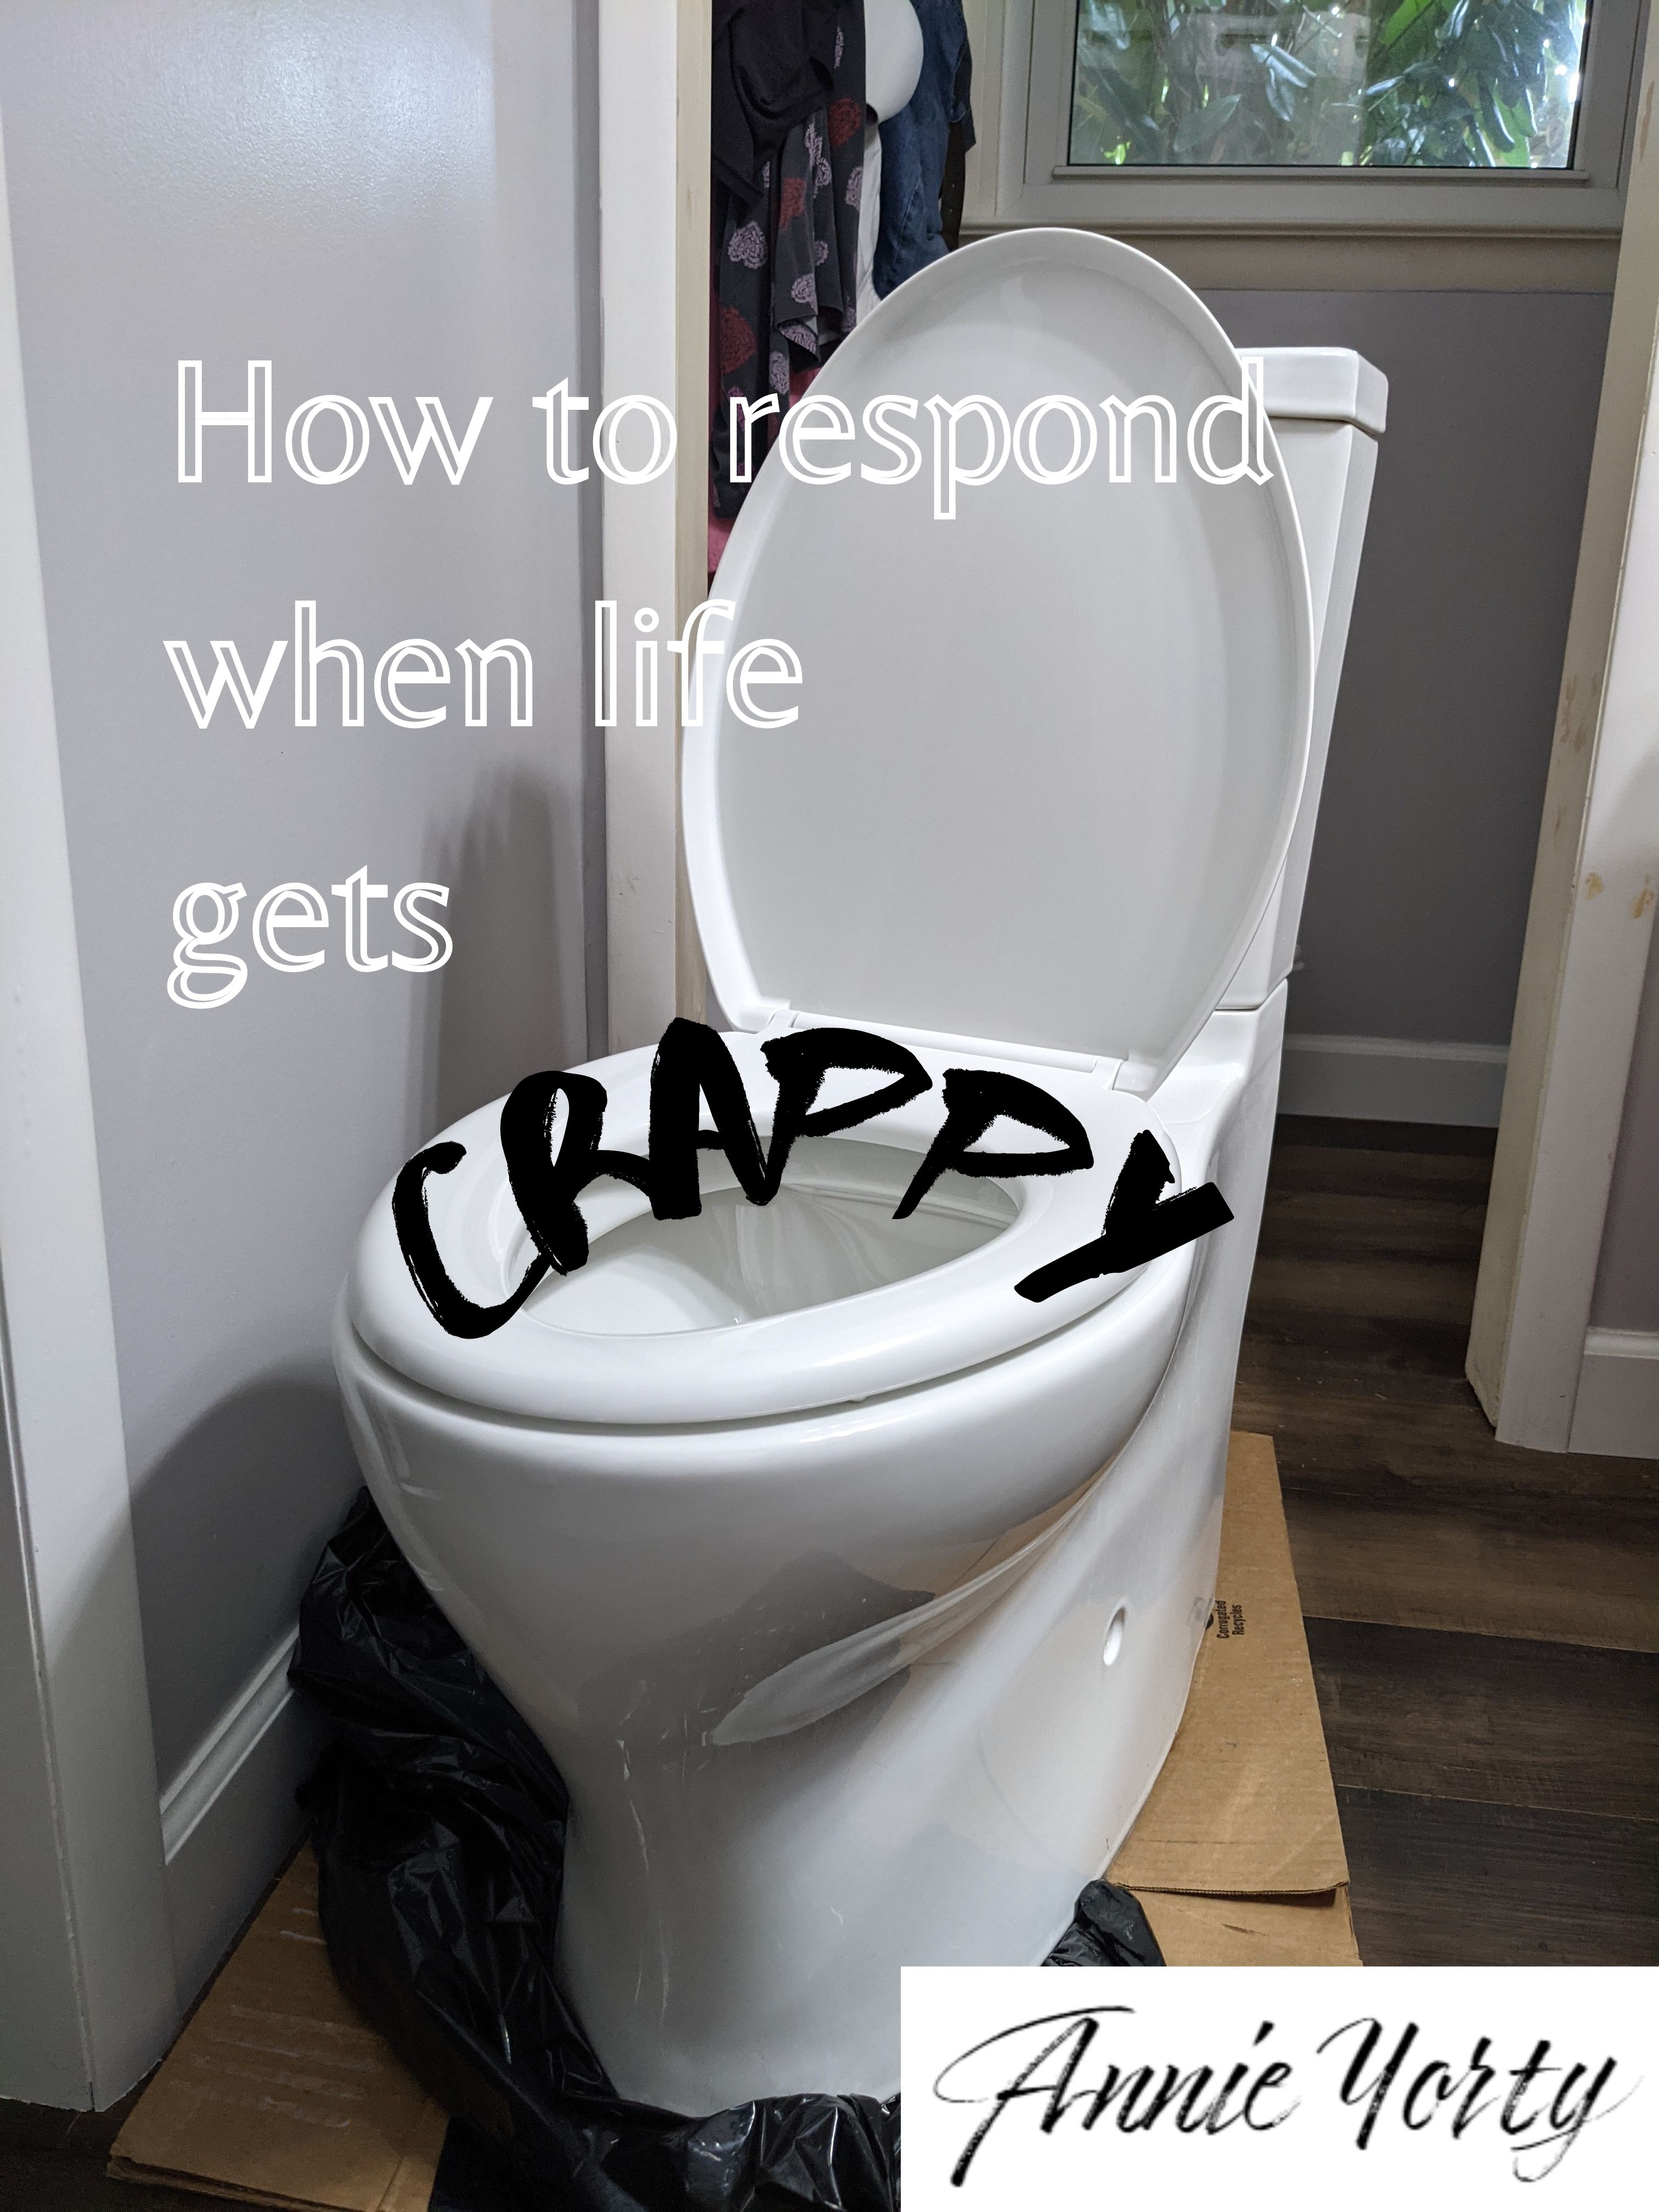 How to respond when life gets crappy